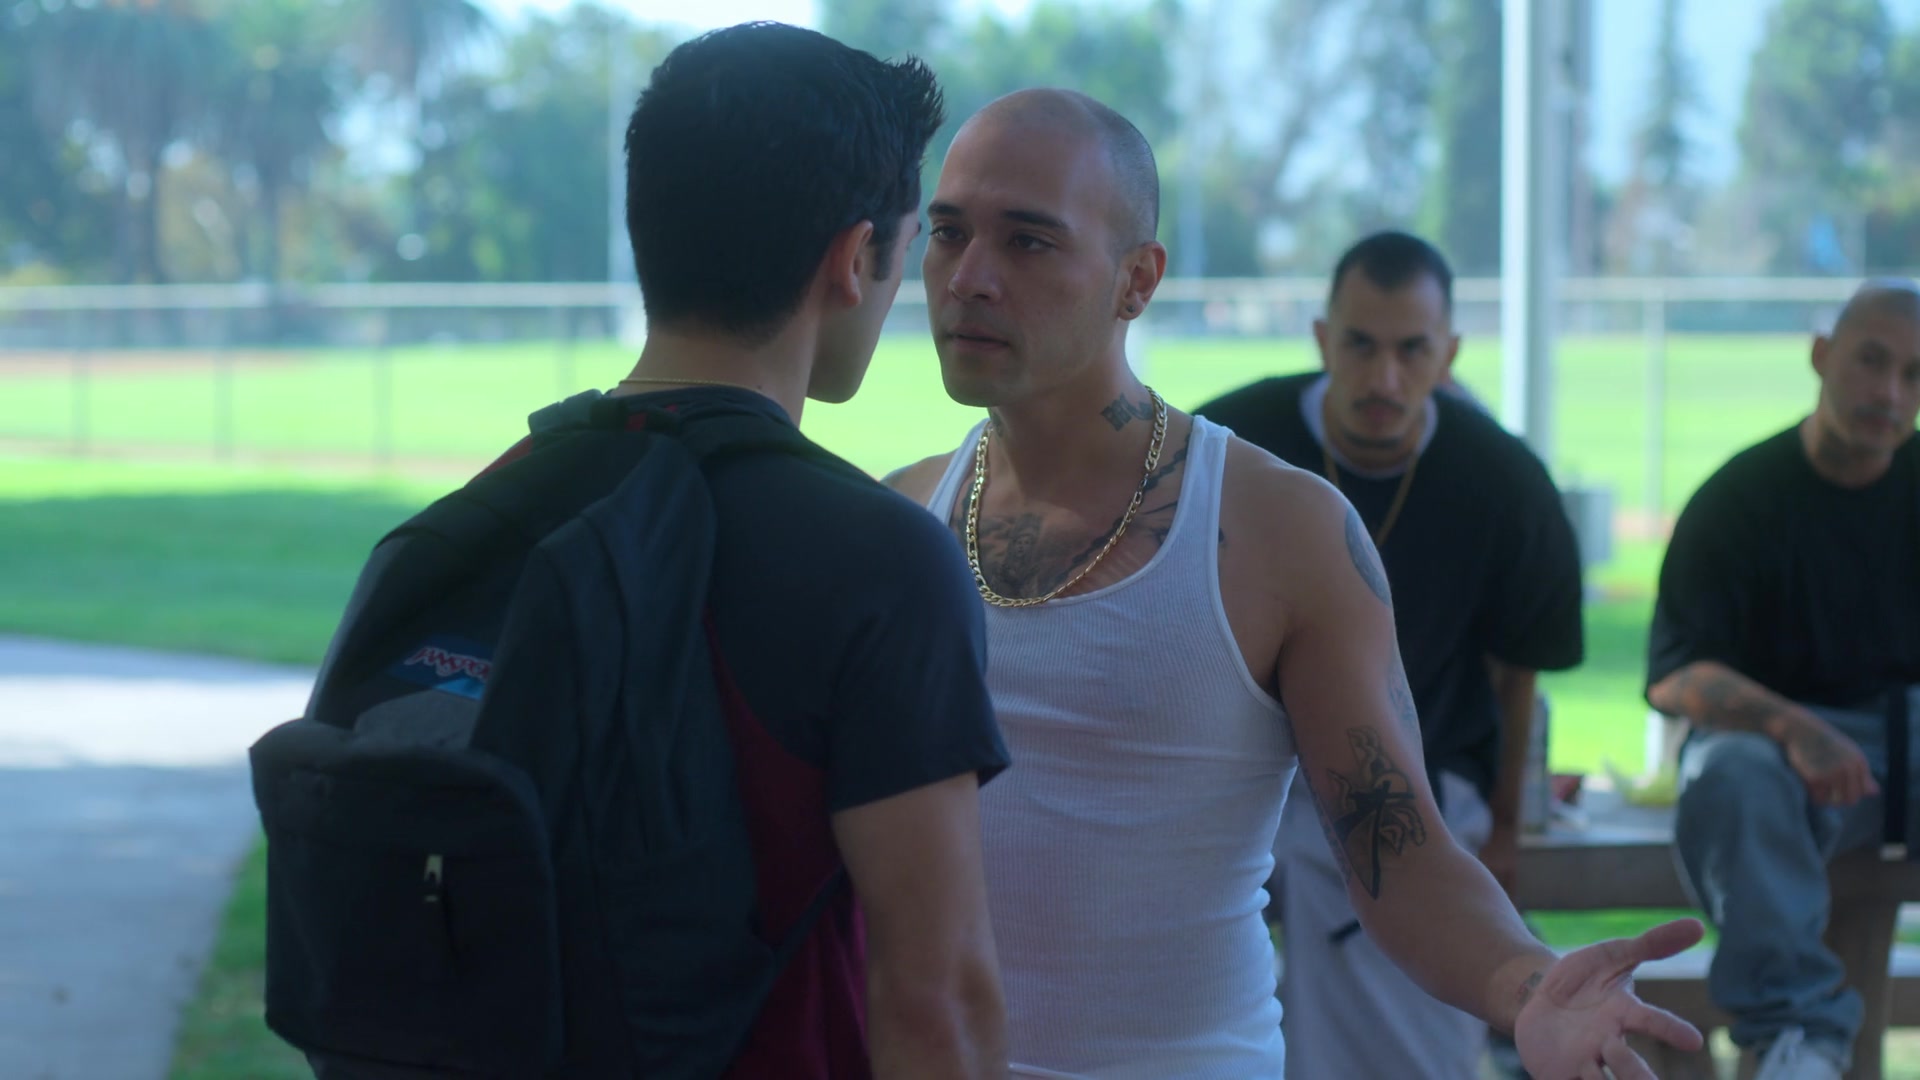 JanSport Black Backpack Used by Diego Tinoco as Cesar in On My Block S03E07...